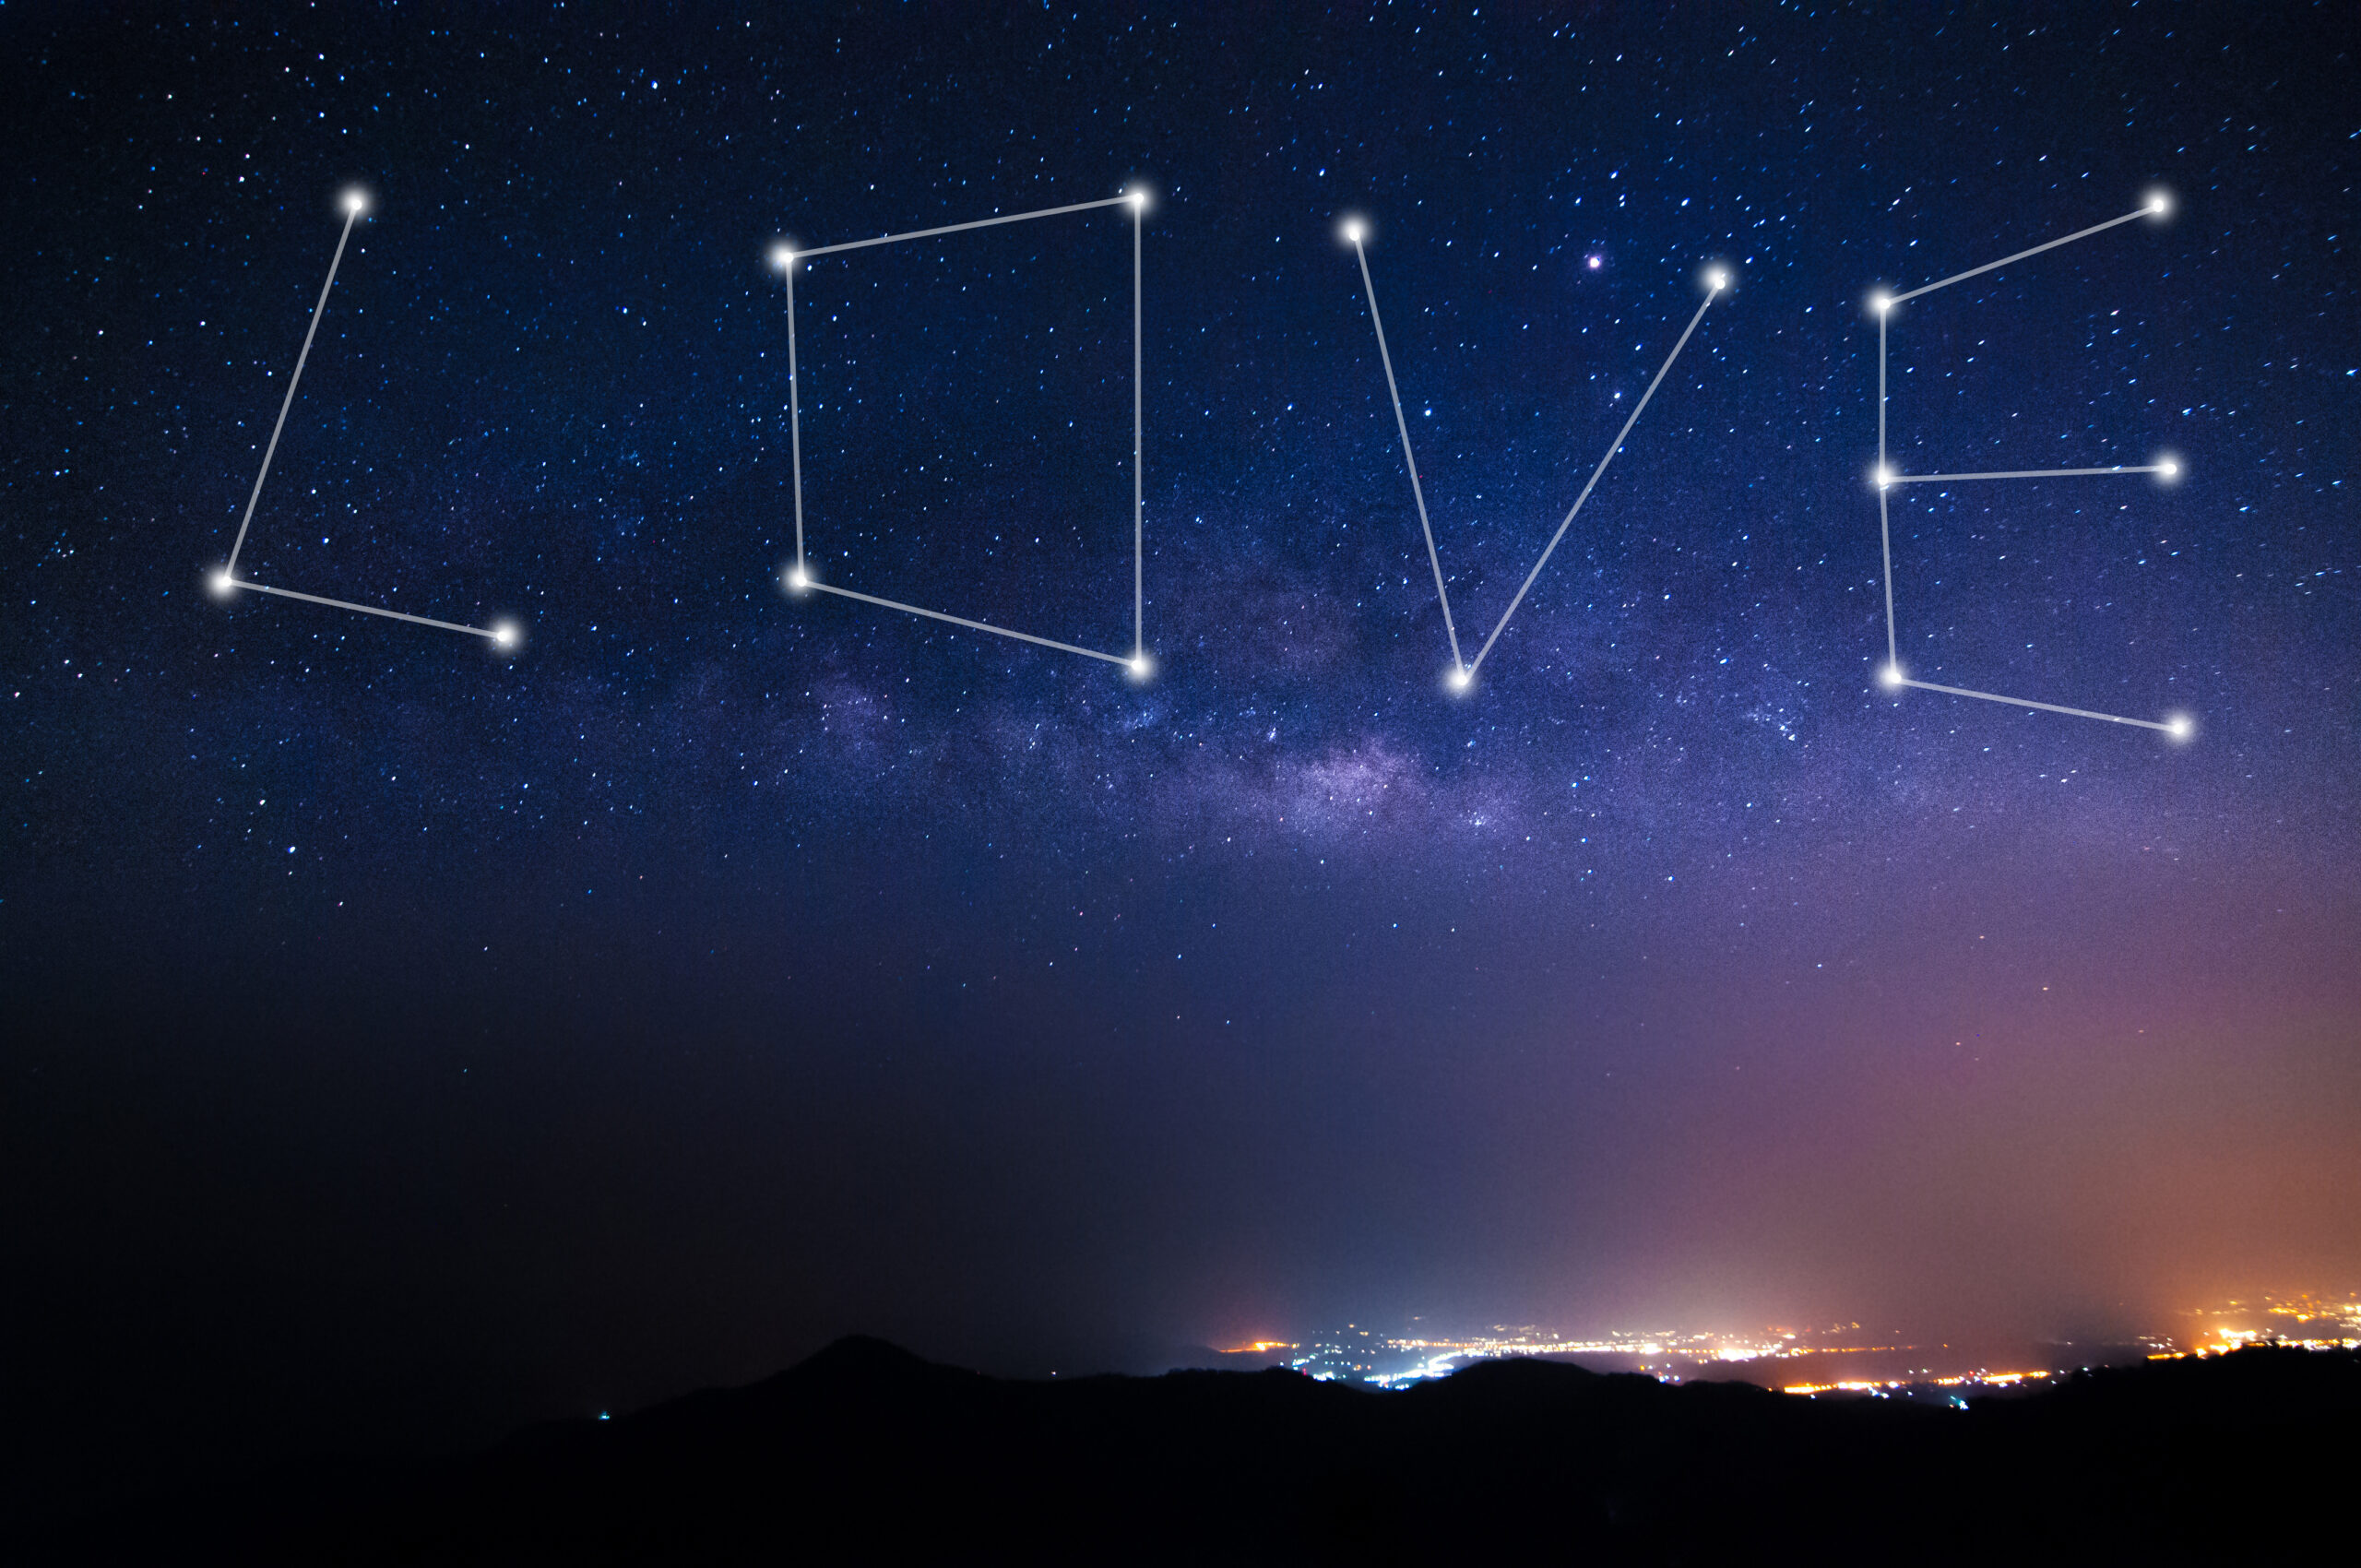 out of the Milky Way, stars form the words “love”